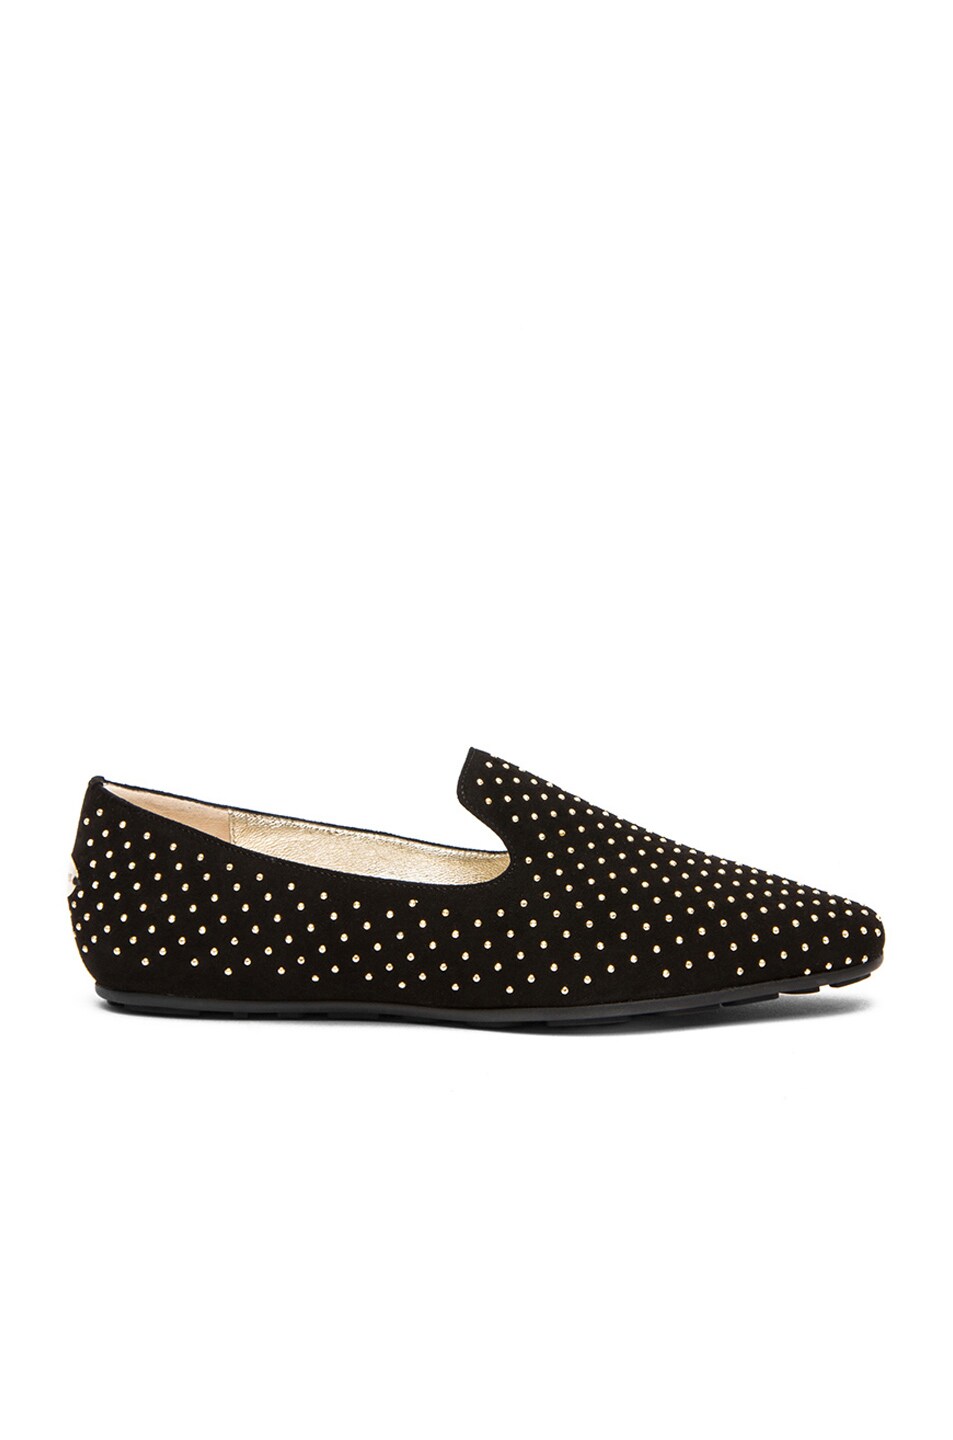 Image 1 of Jimmy Choo Wheel Suede Weekend Studded Flats in Black & Gold